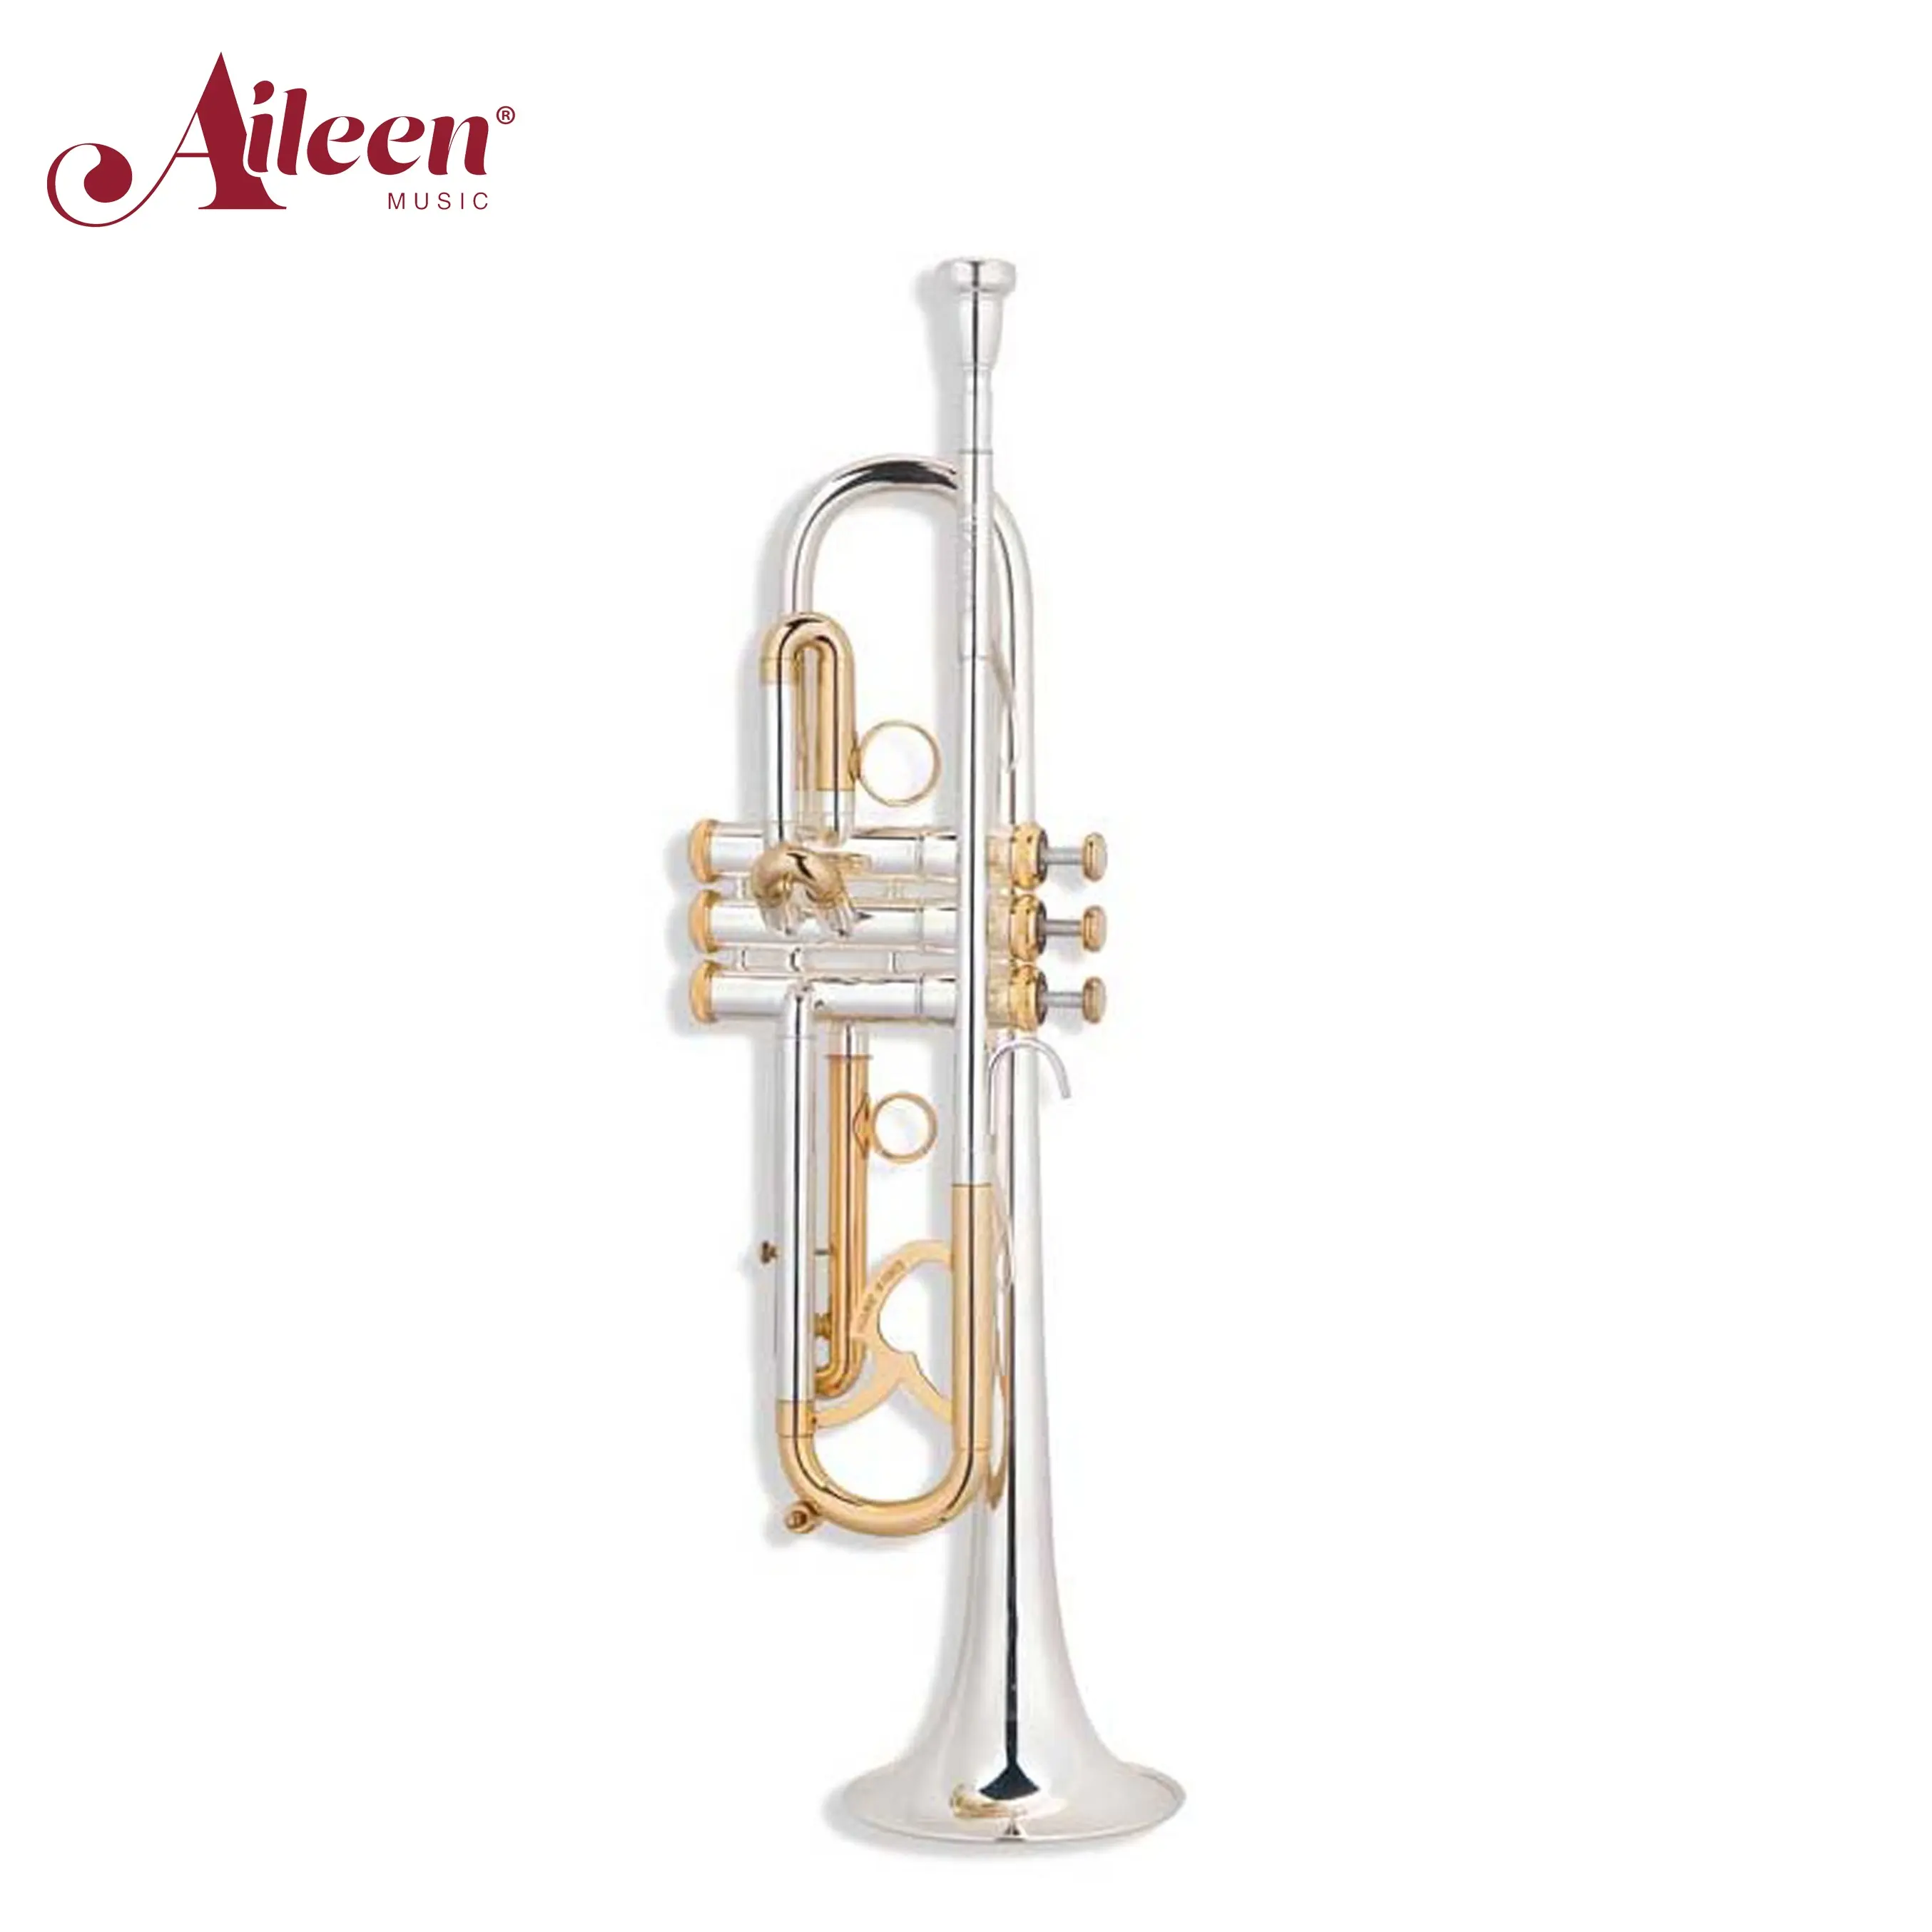 AileenMusic Middle Grade Hot Sale Wholesale bB key Professional Brass Trumpet (TP-M410GS)